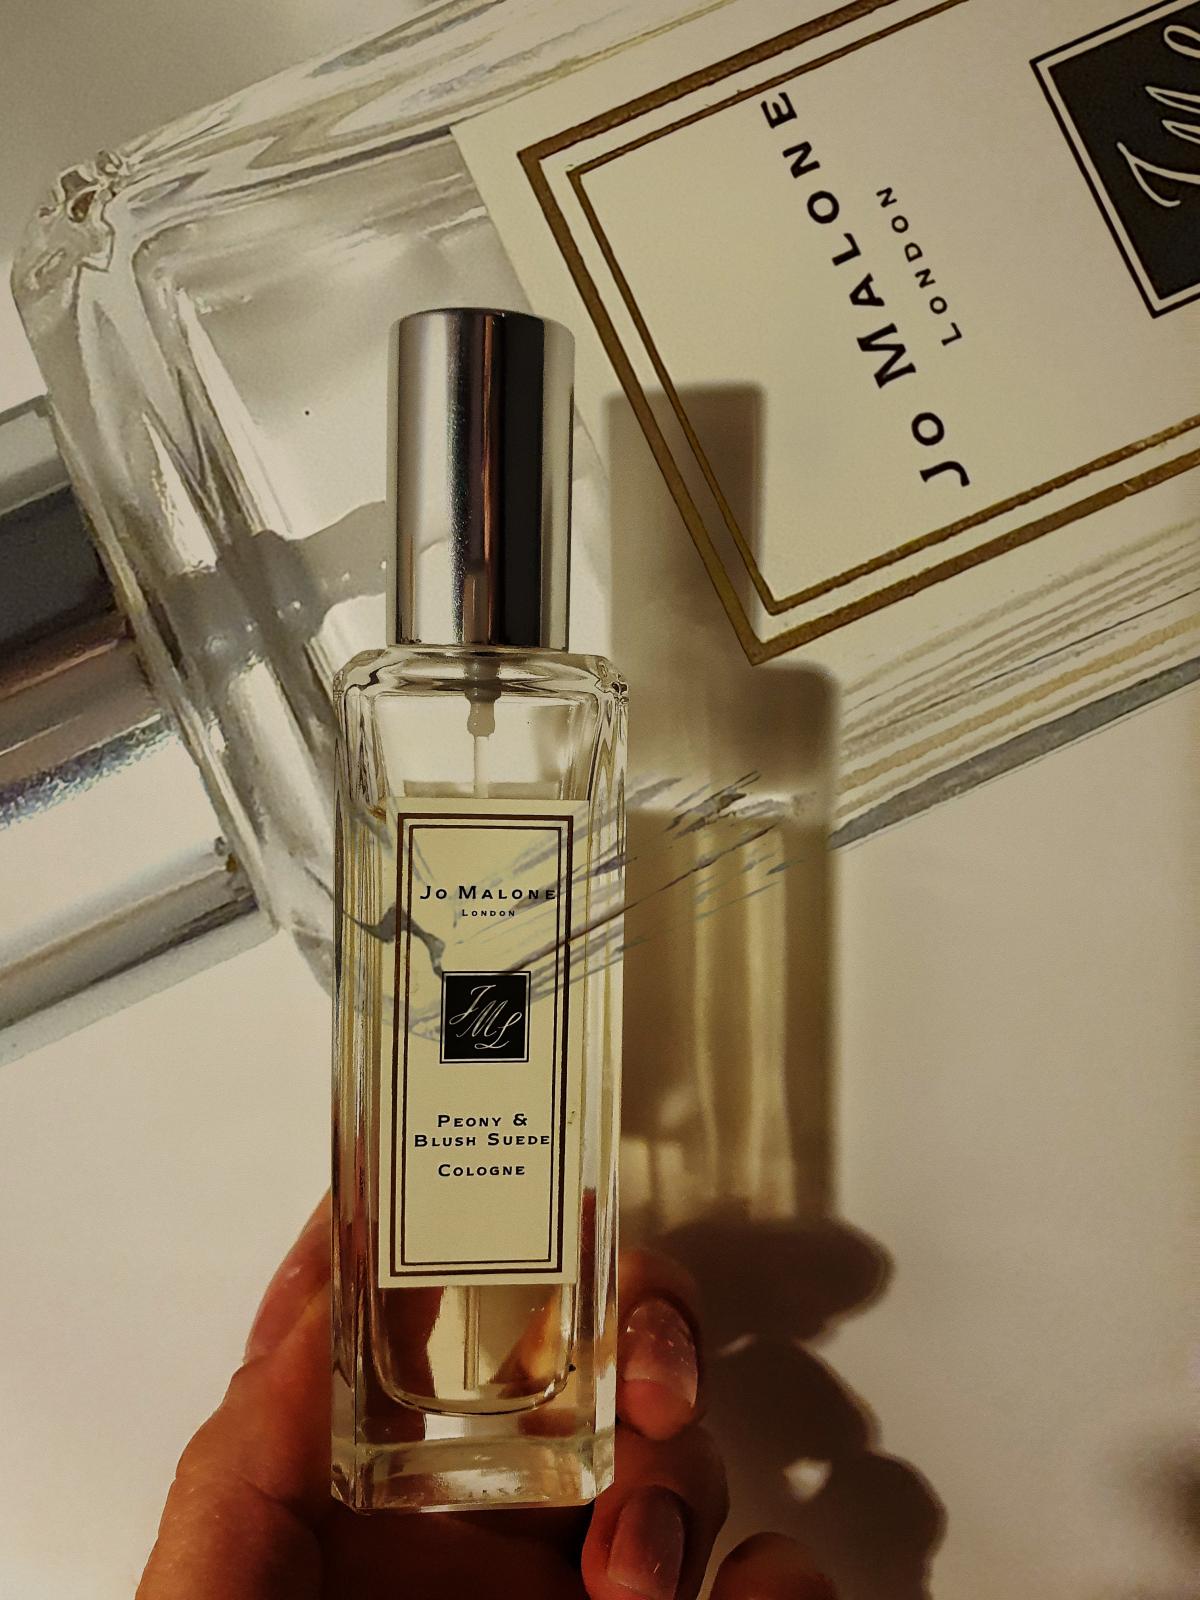 Peony & Blush Suede Jo Malone London perfume - a fragrance for women 2013